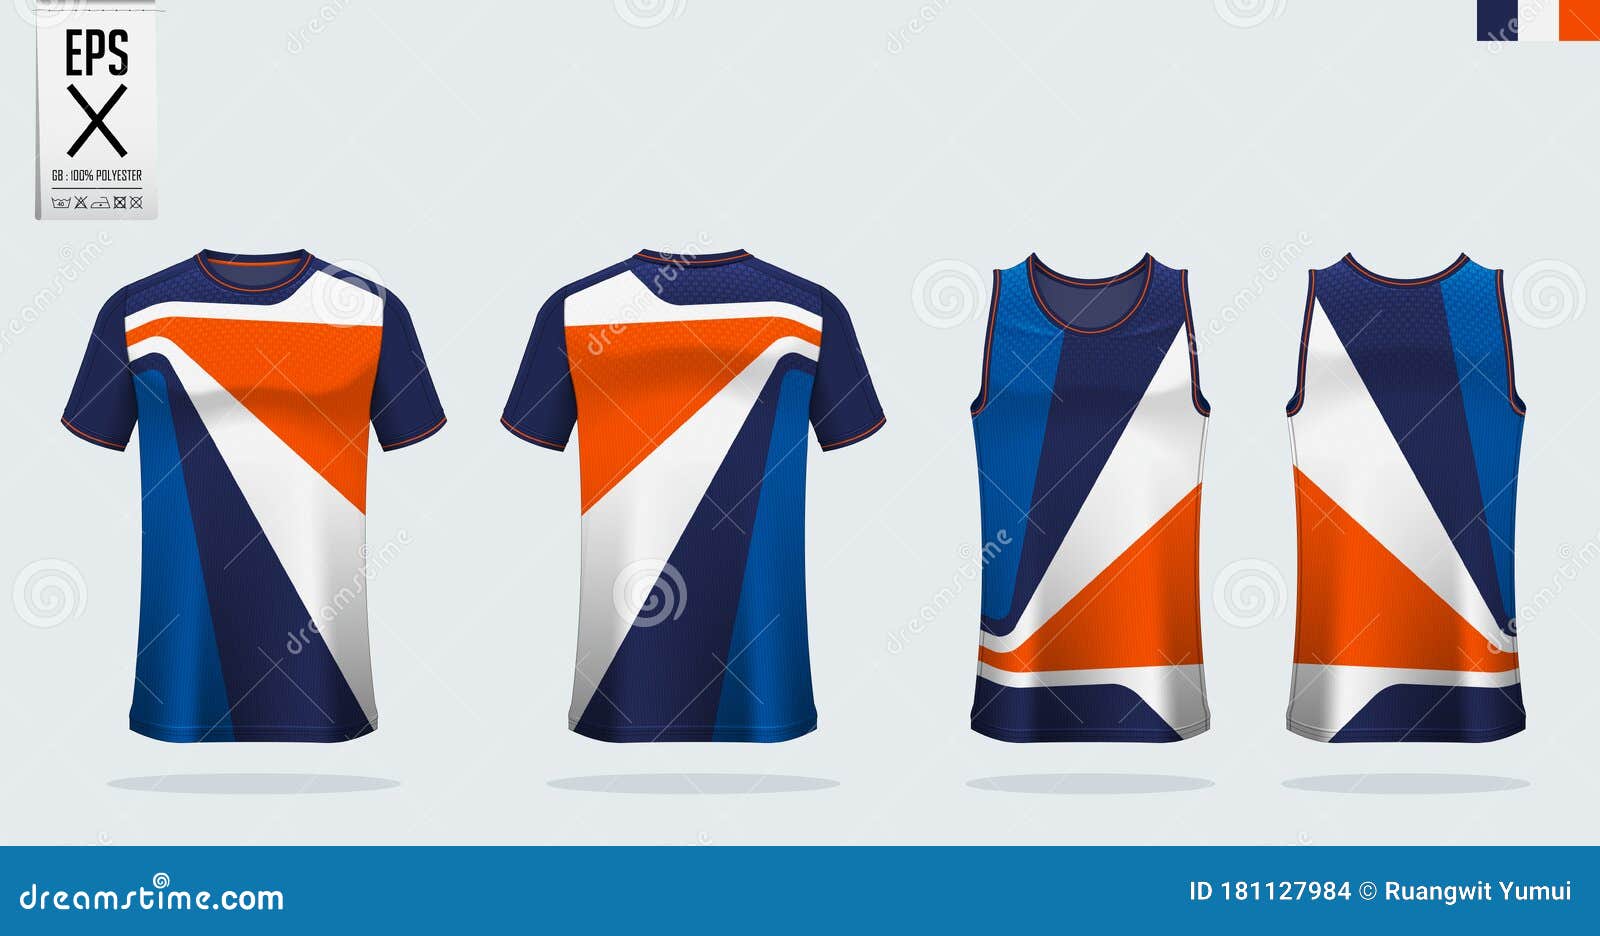 Download T Shirt Sport Mockup Template Design For Soccer Jersey Football Kit And Tank Top For Basketball Jersey Stock Vector Illustration Of Layout Number 181127984